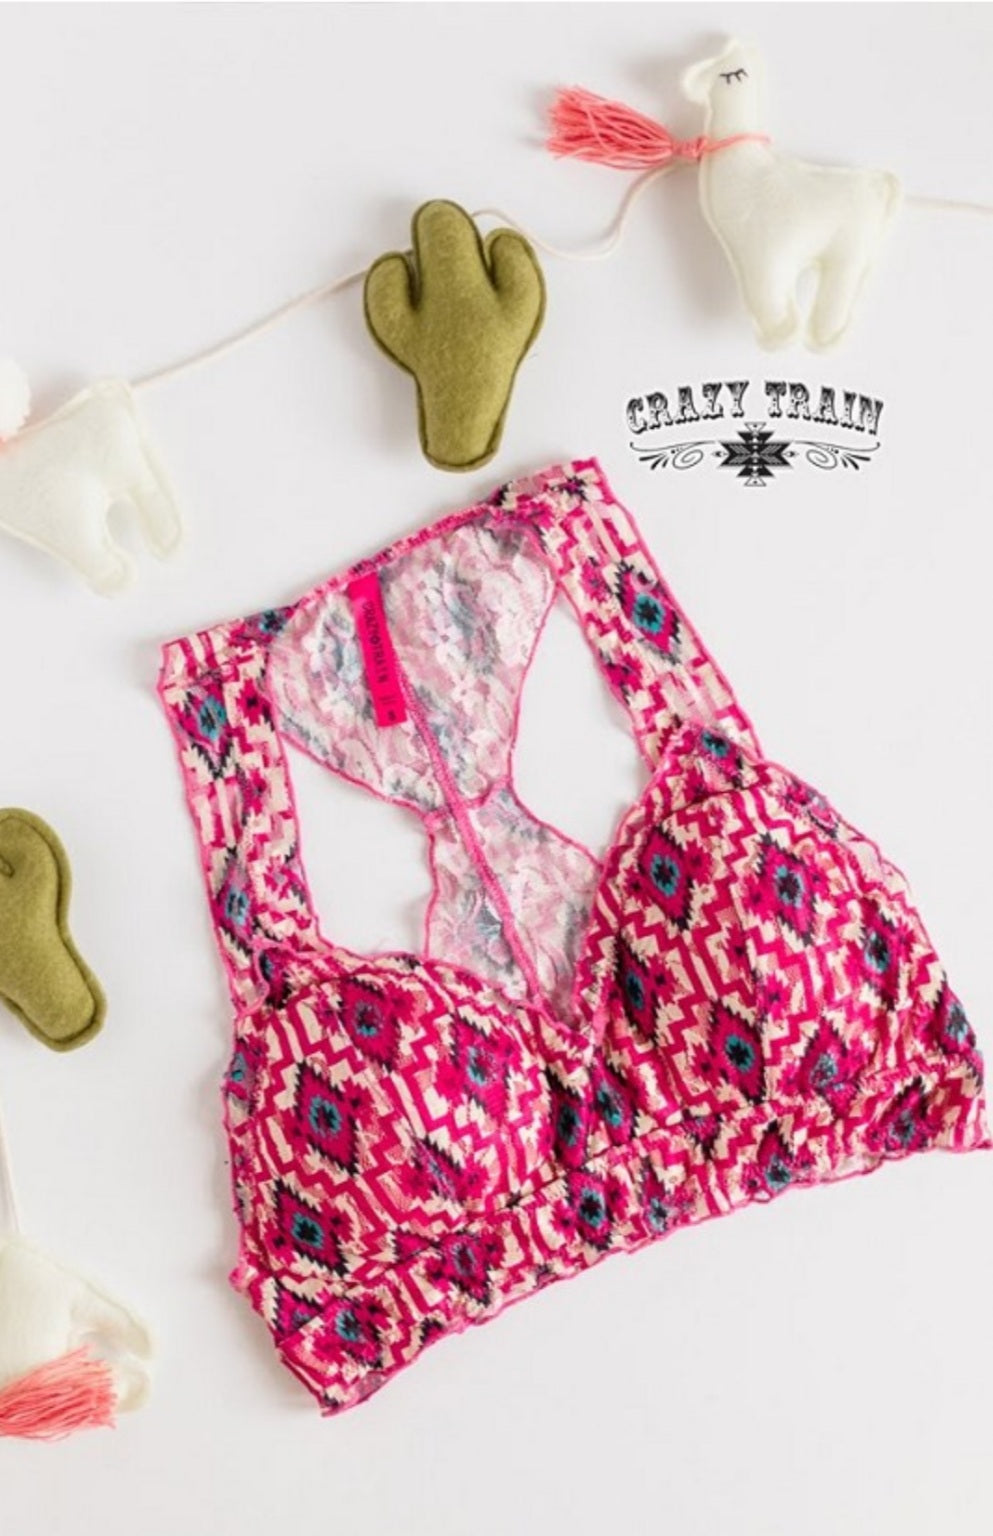 Way Out West Bralette ** Pink Aztec